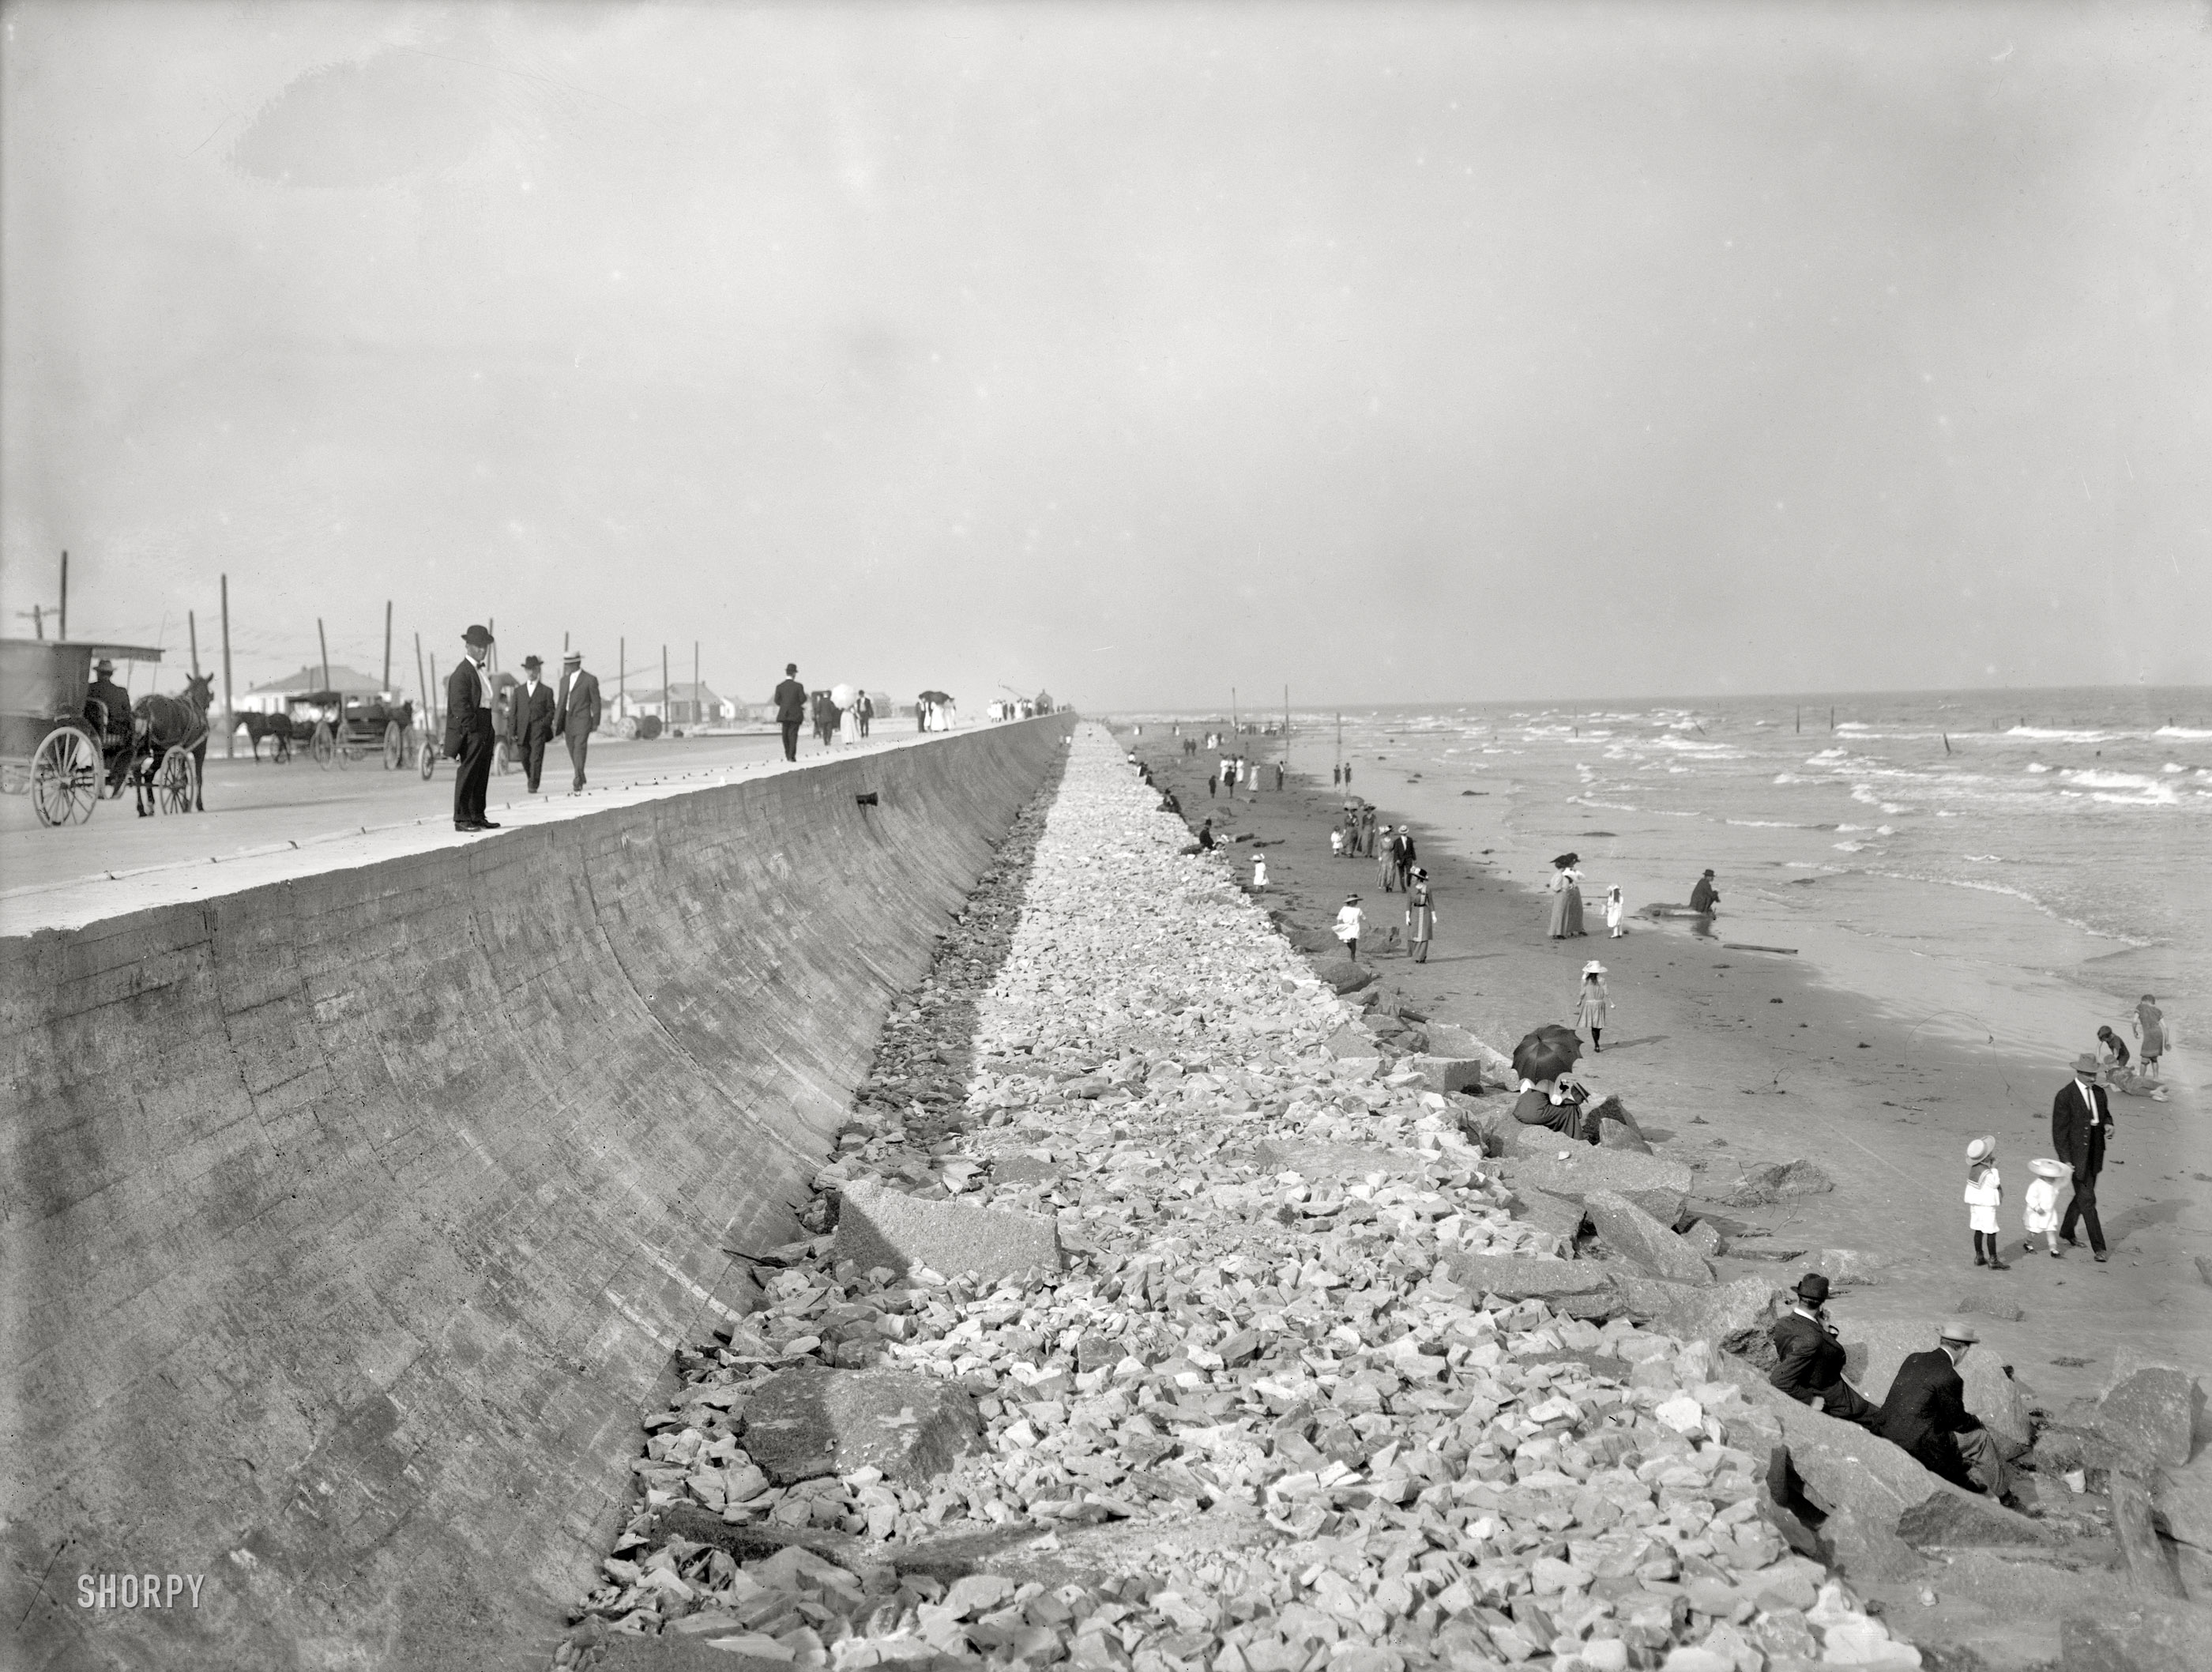 Circa 1905. "Seawall and beach at Galveston, Texas." 6½ x 8½ inch dry plate glass negative, Detroit Publishing Company. View full size.